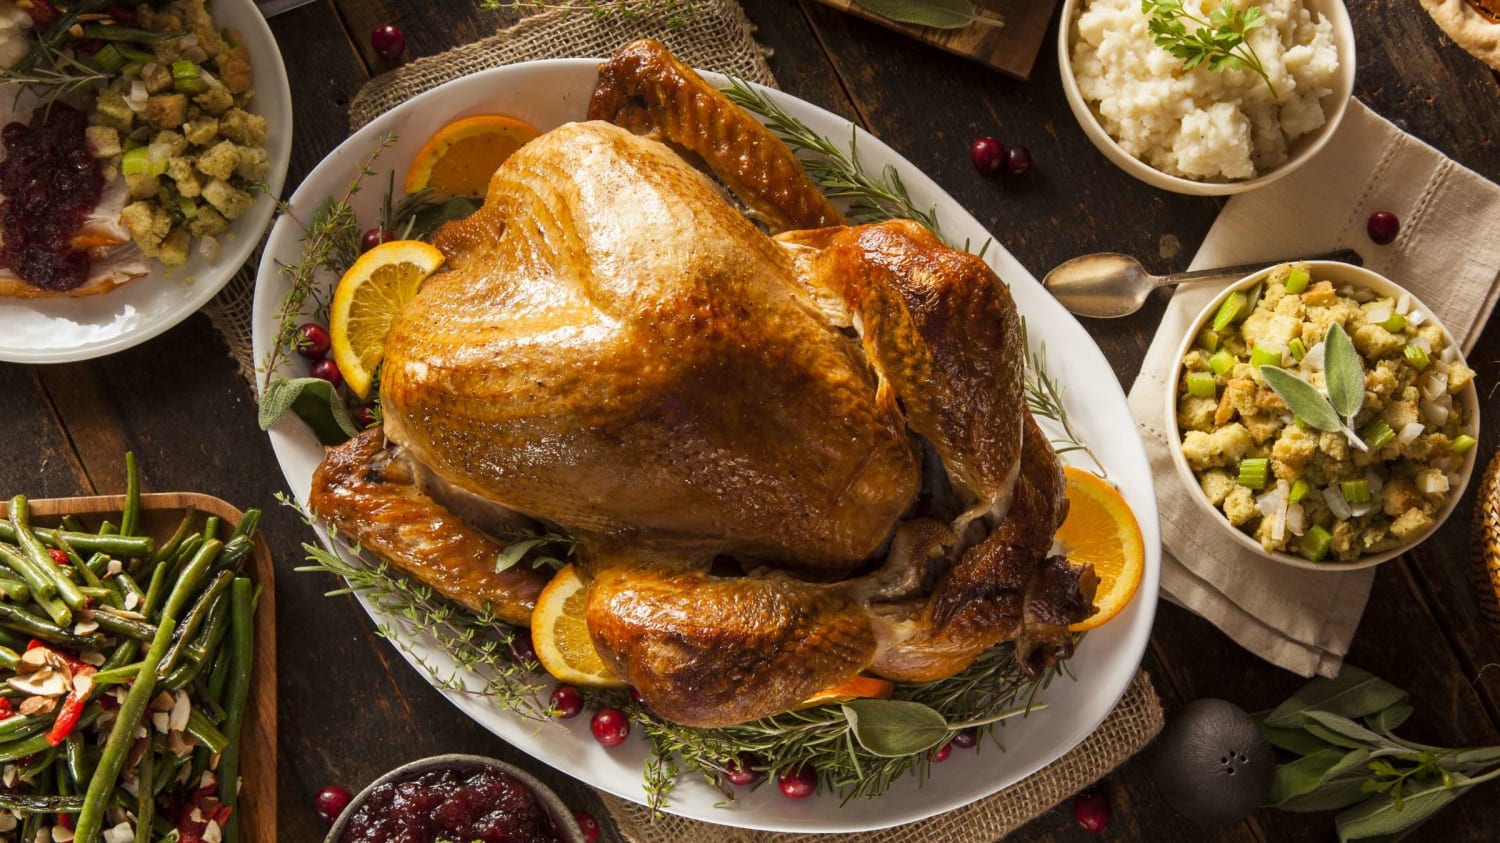 8 Expert Tips to Make Thanksgiving Easy for First Timers